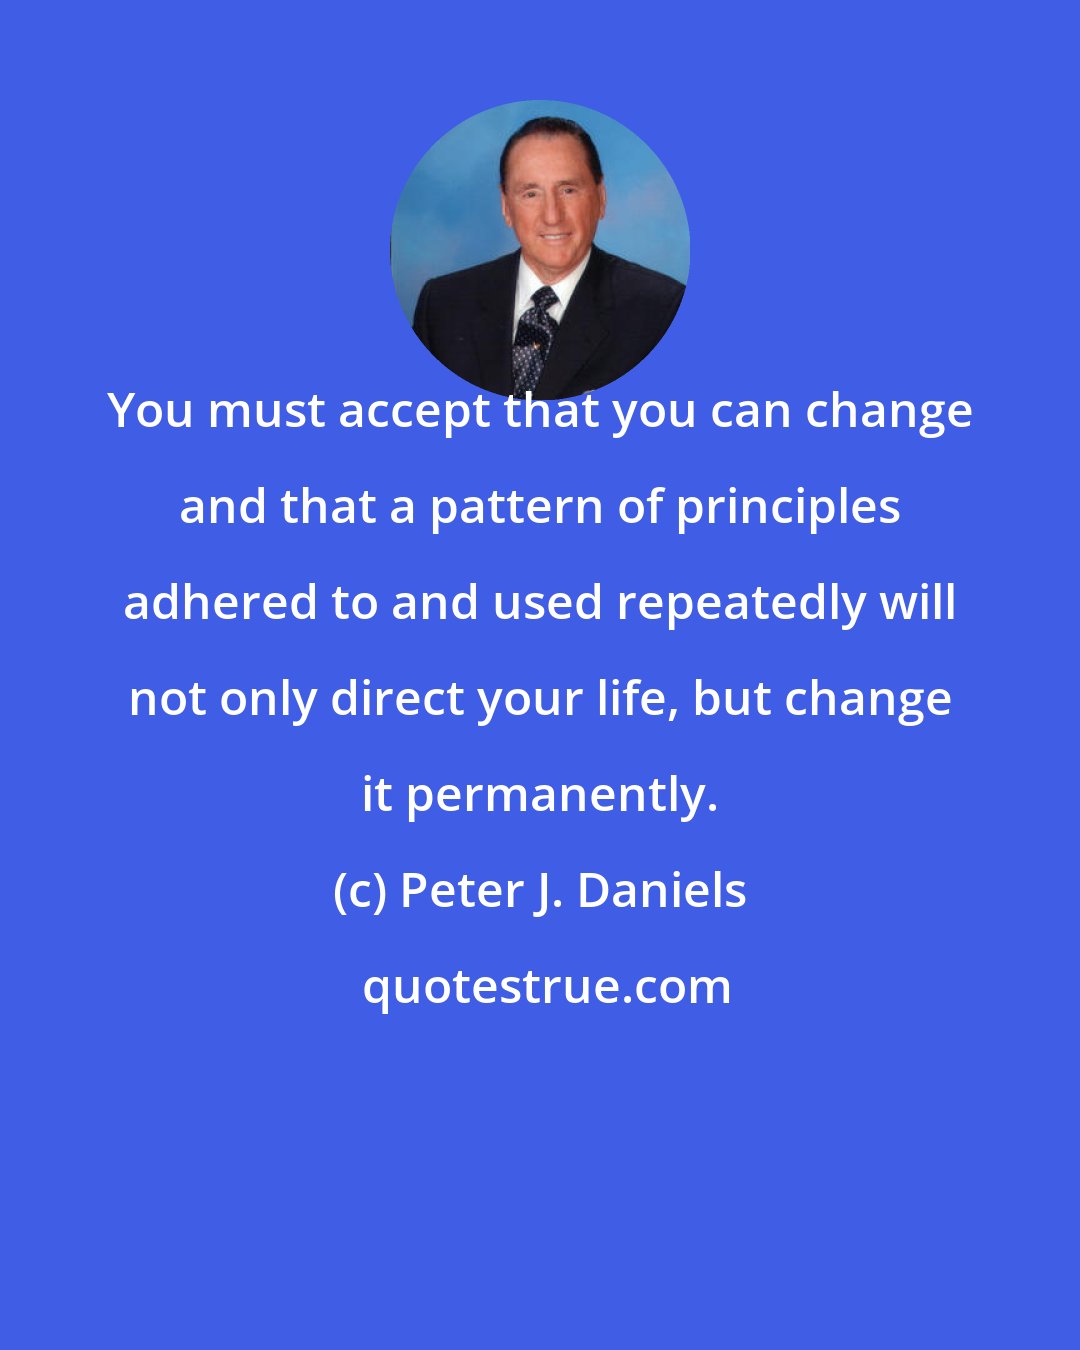 Peter J. Daniels: You must accept that you can change and that a pattern of principles adhered to and used repeatedly will not only direct your life, but change it permanently.